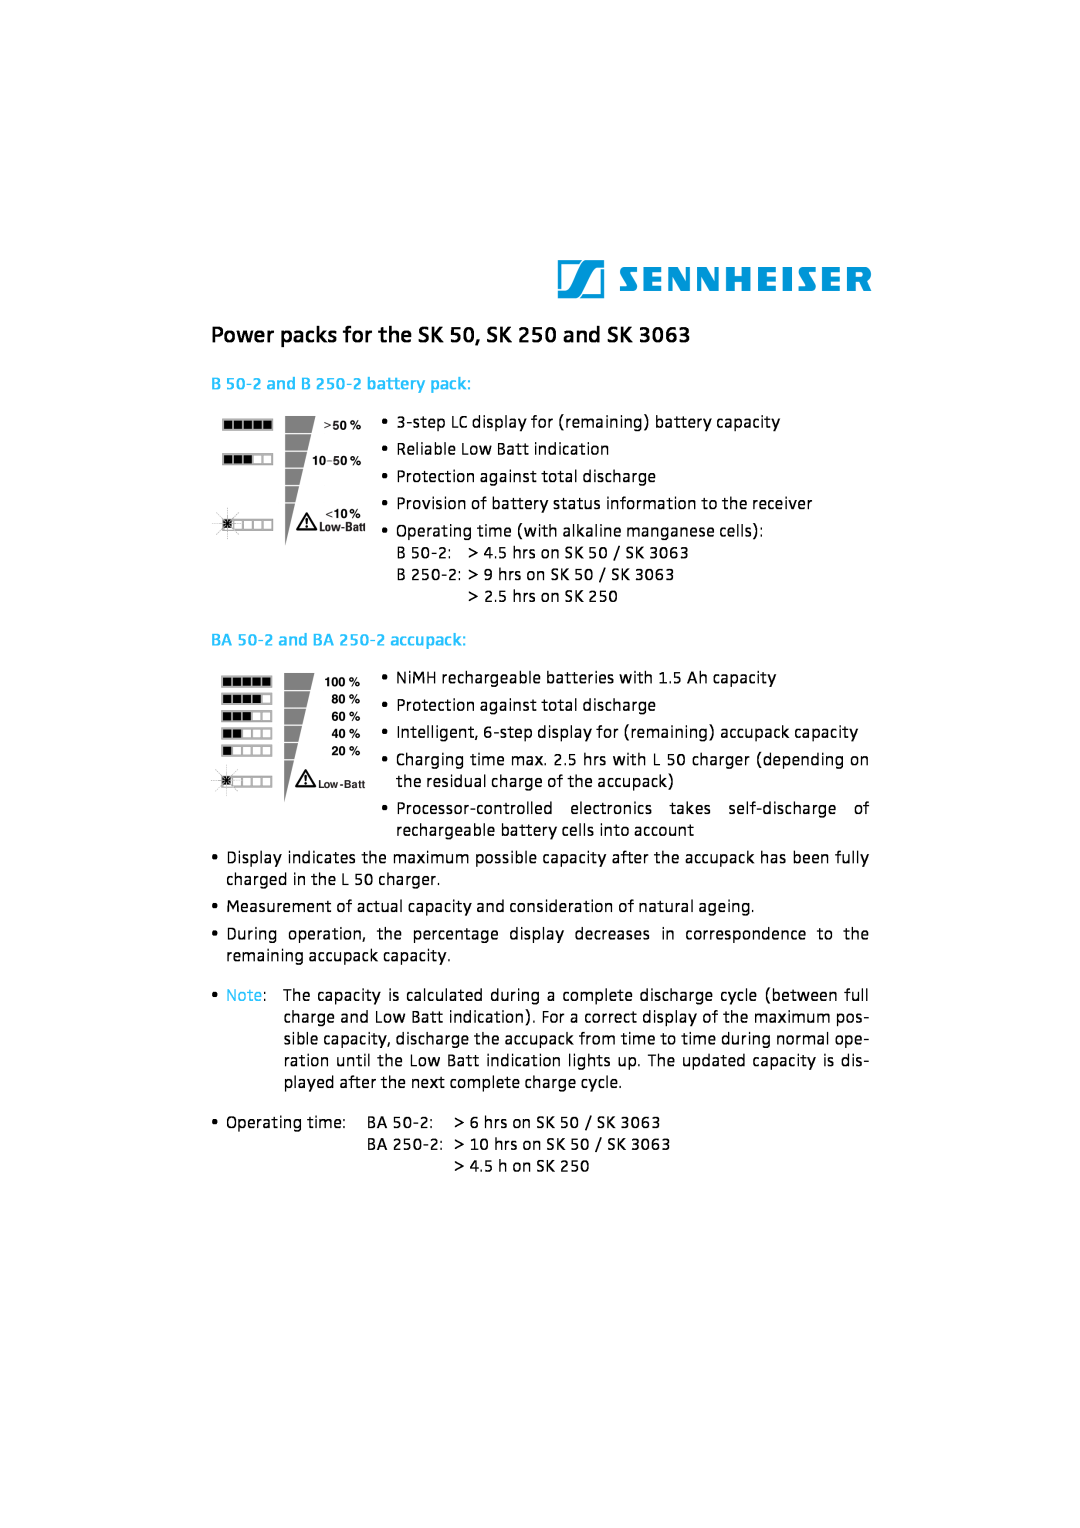 Sennheiser SK 3063 Power packs for the SK 50, SK 250 and SK, B 50-2and B 250-2battery pack, BA 50-2and BA 250-2accupack 